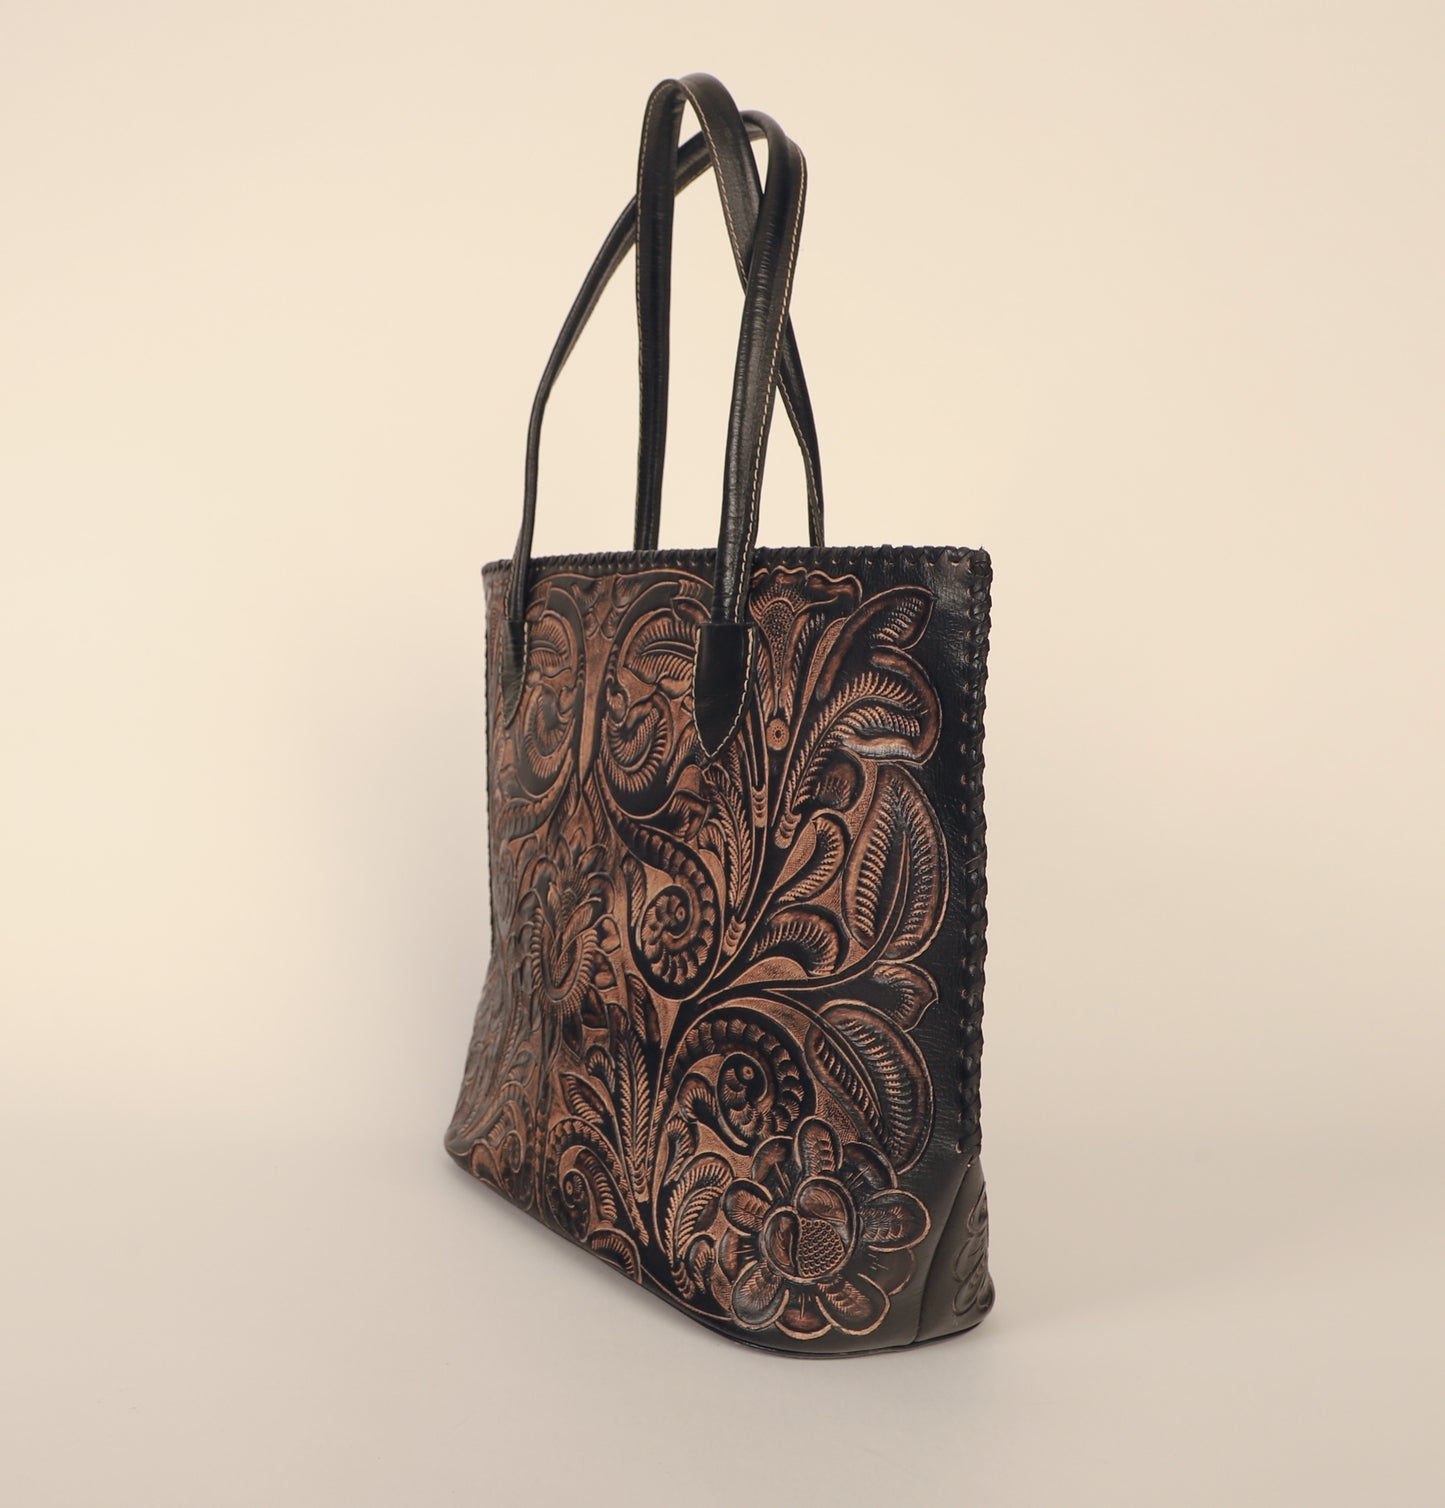 Over-sized authentic leather tote bag with traditional Mexican design etched on both sides. Fully lined with suede. Side view